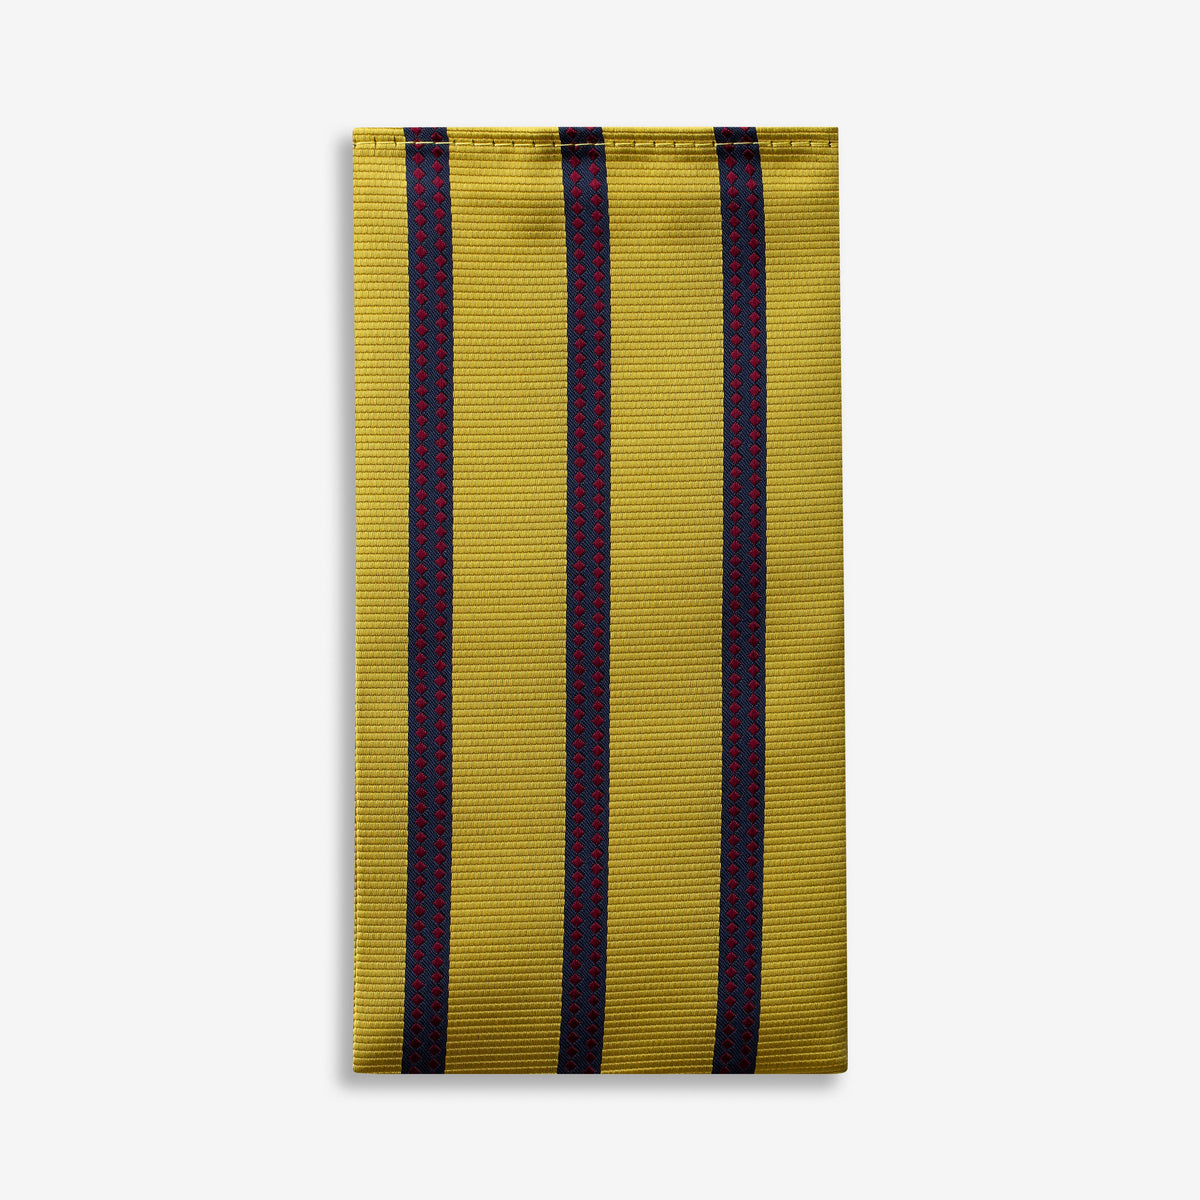 The Golden Red Checkered Pocket Square